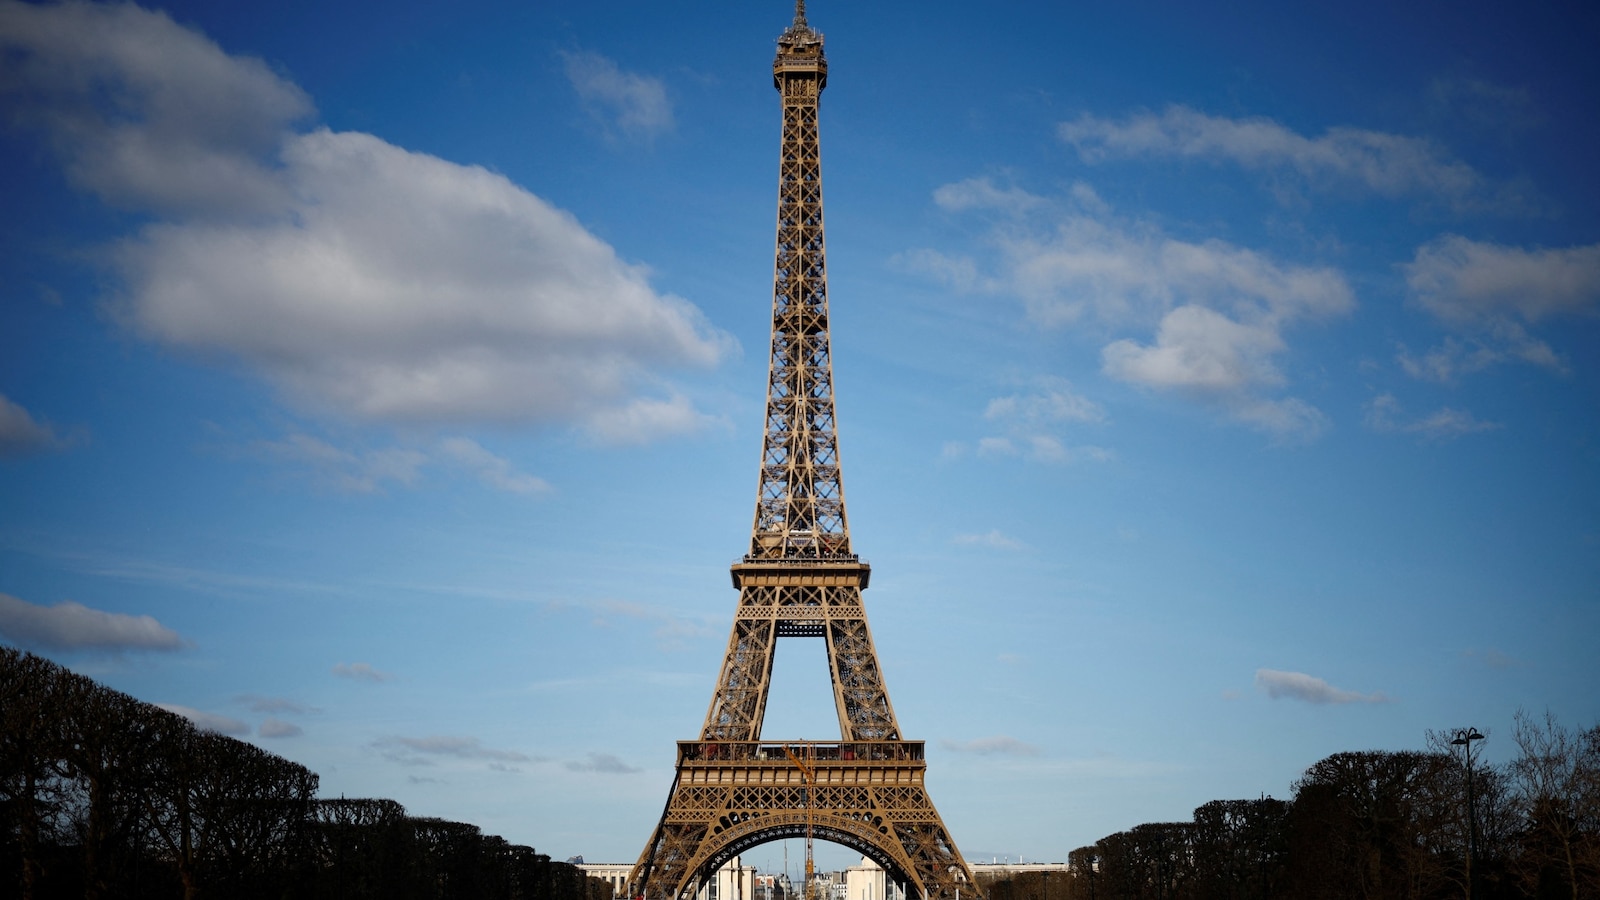 Workers' strike leads to temporary closure of the Eiffel Tower due to protest against management decisions